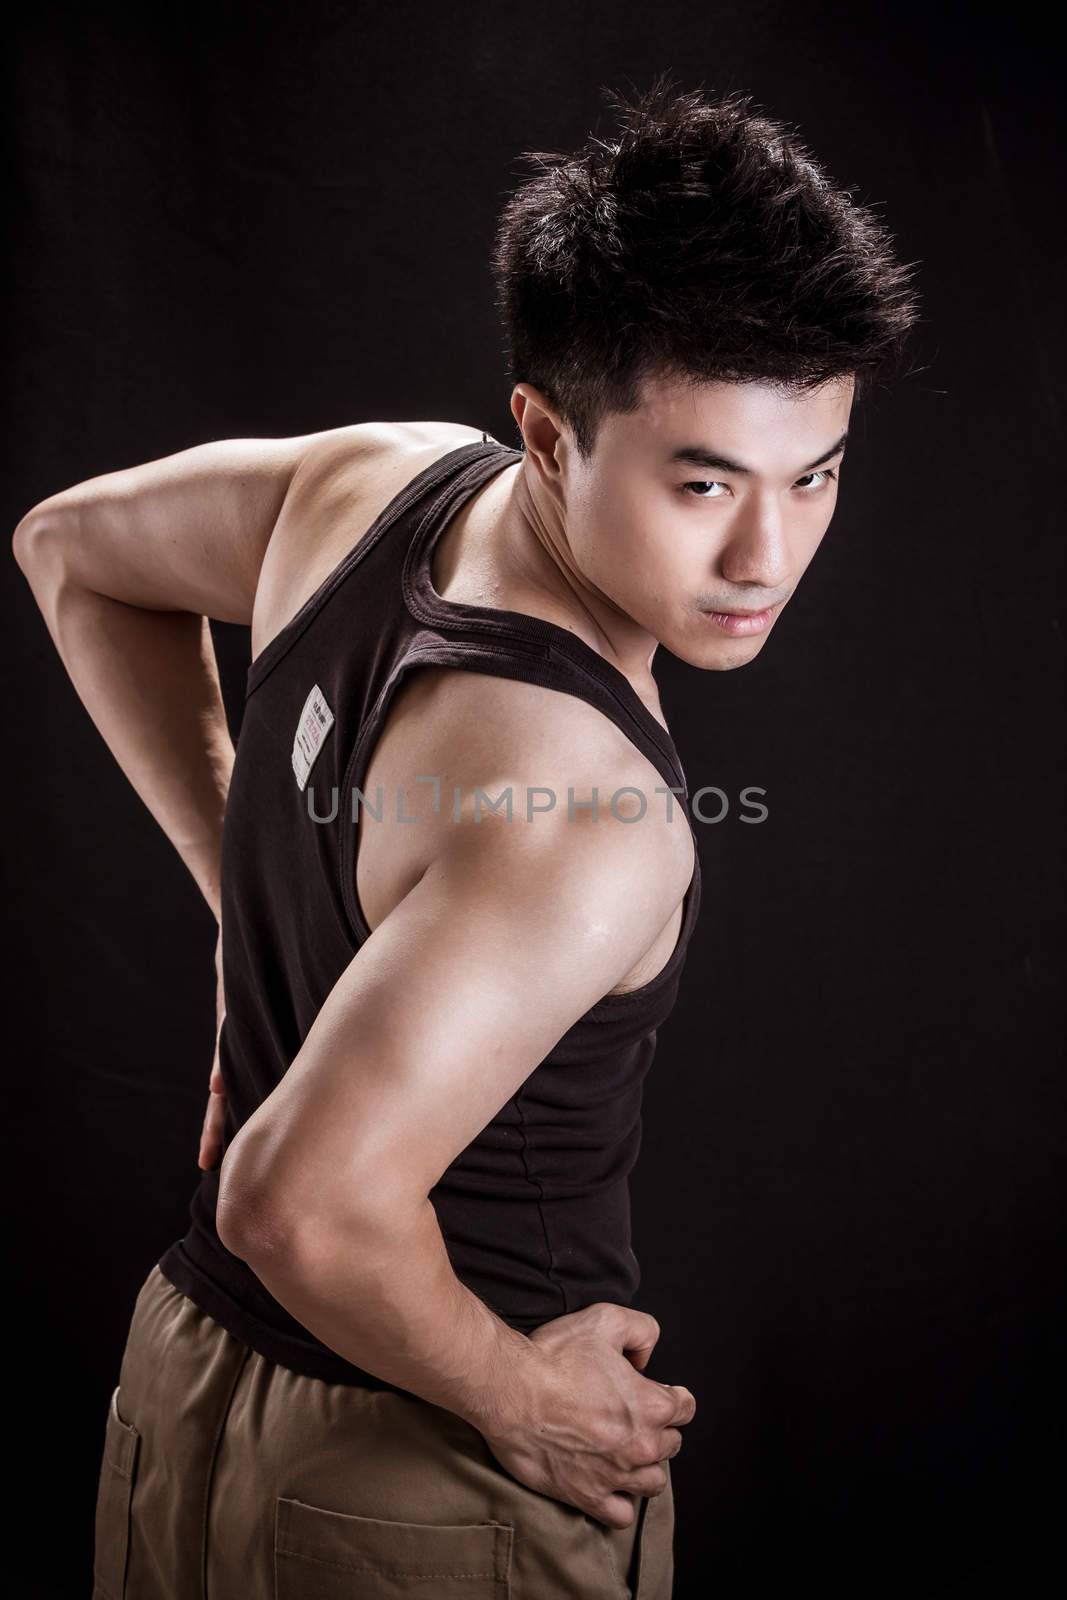 Portrait of Asian young man on black background - Show muscle and strengh